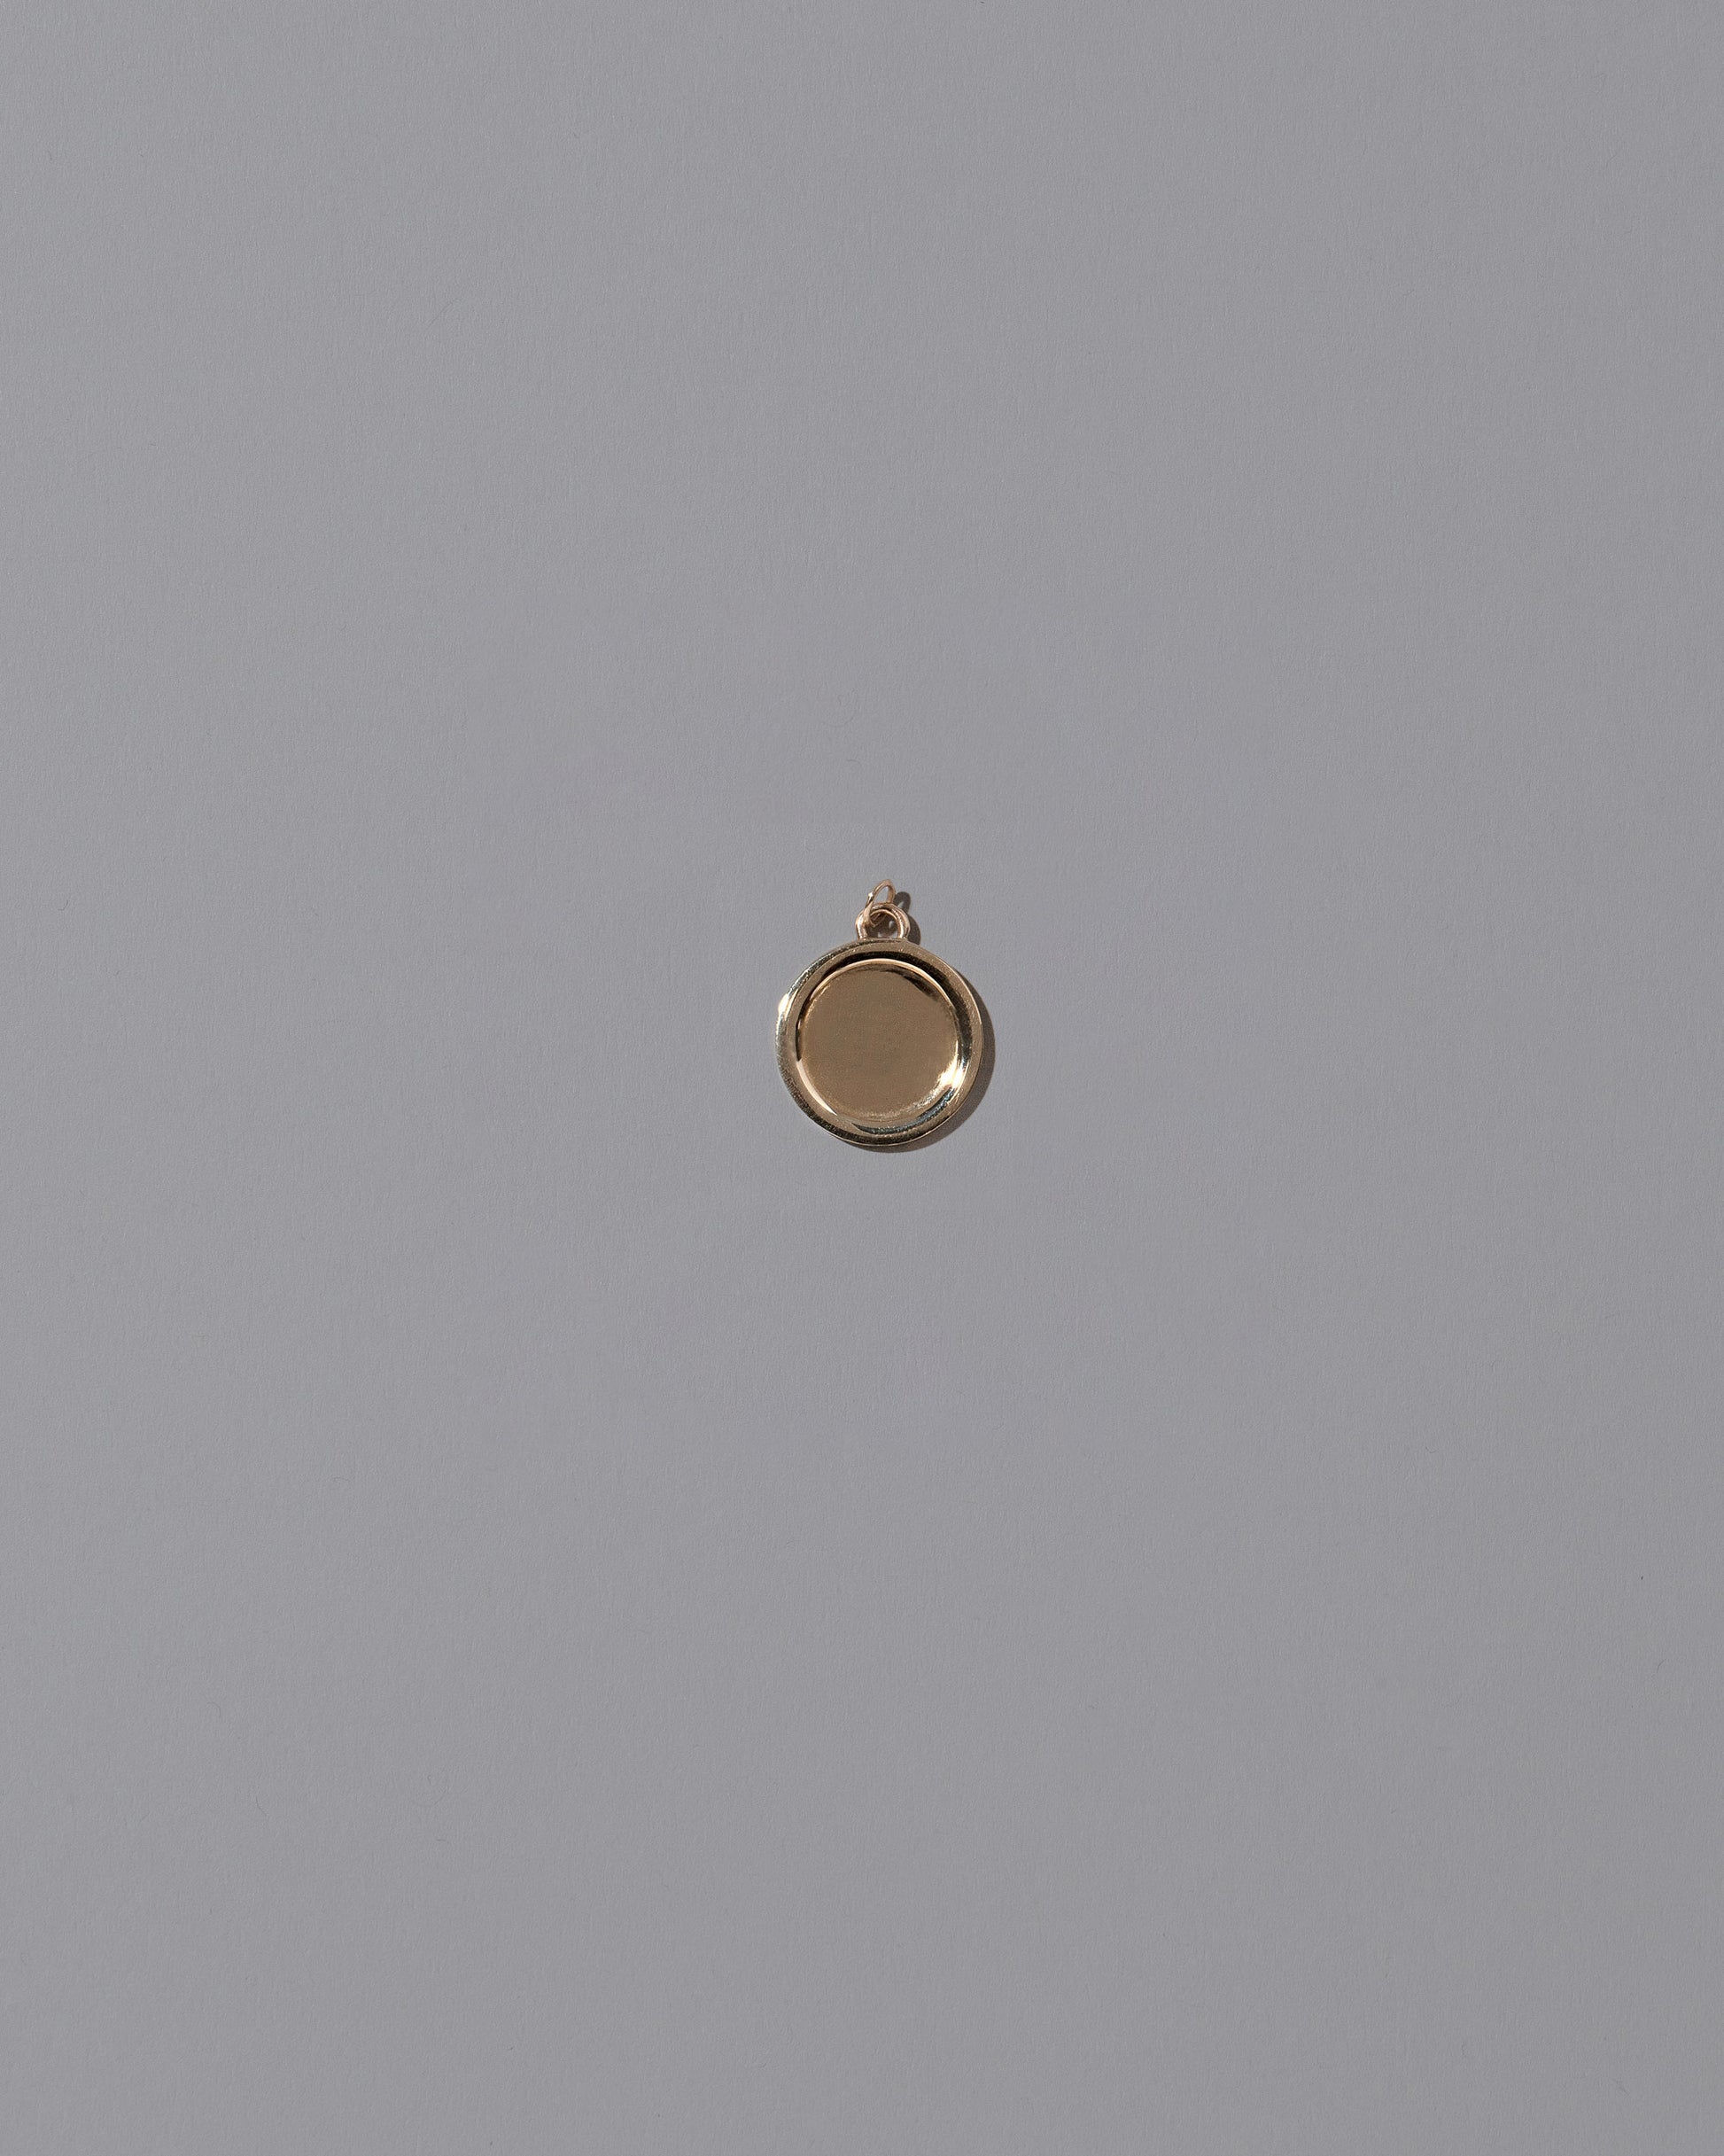 Unfinished Small Round Memento Pendant on light color background.